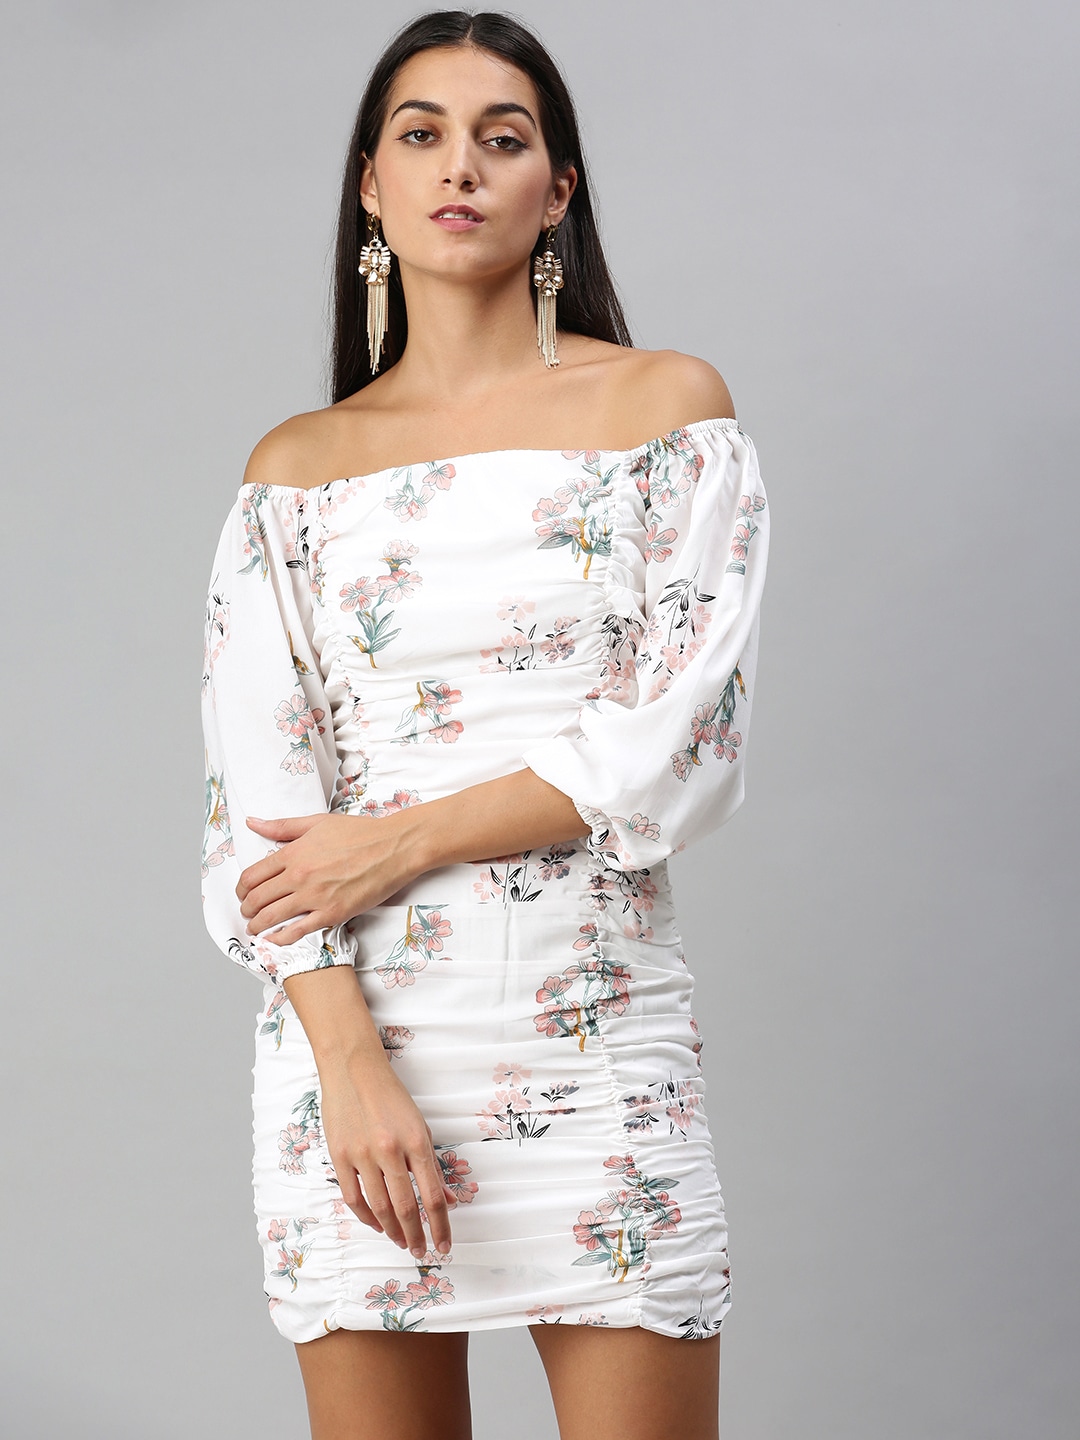 Pristine White Floral Print Ruched Dress- Top 14 dresses from Myntra